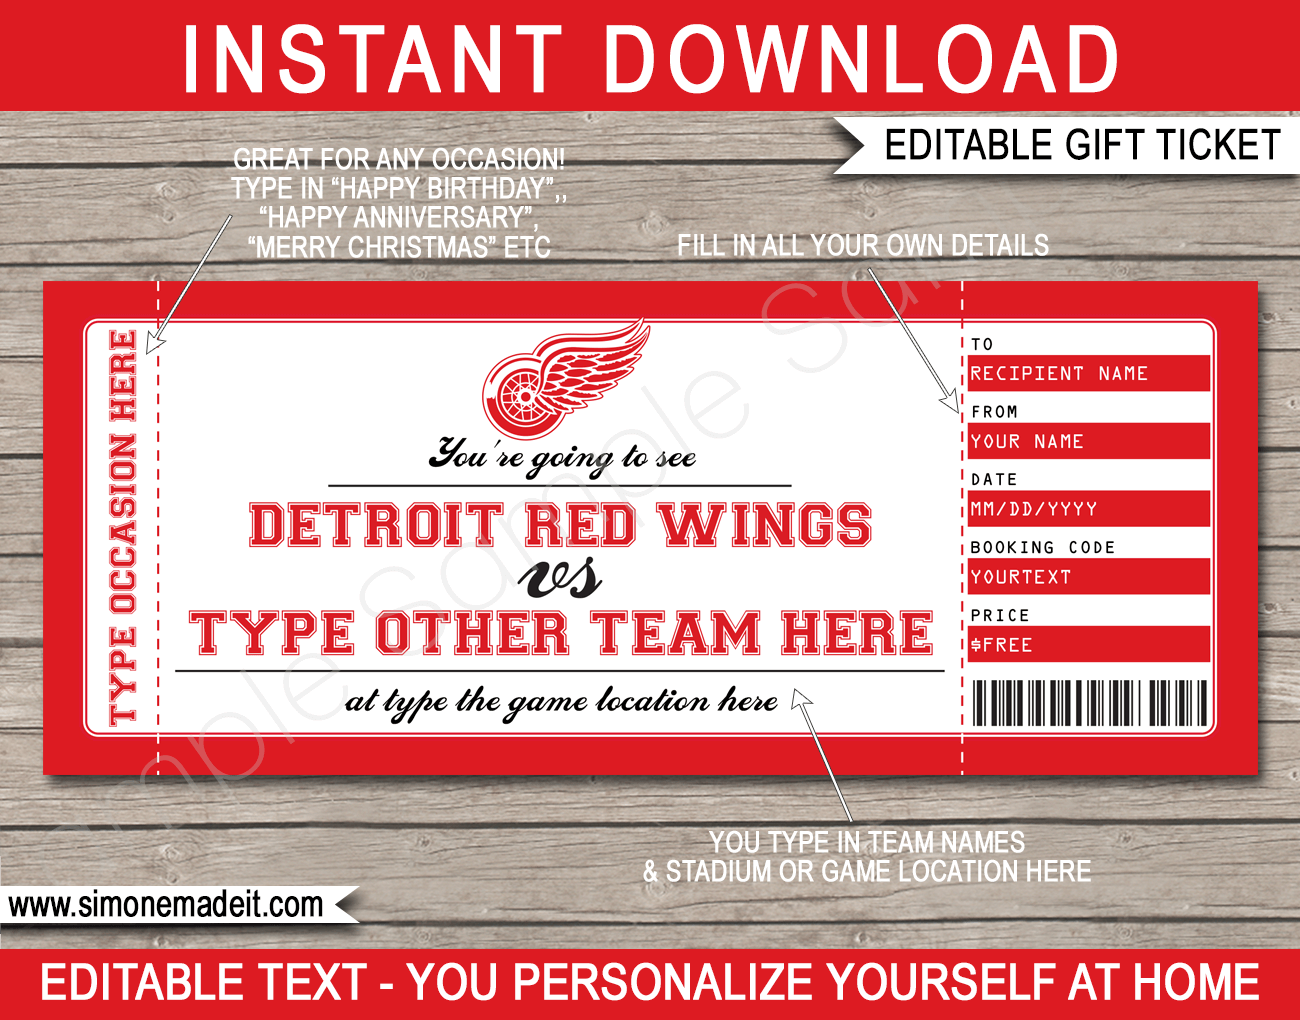 No place like home: Ticket options, hope for future keep fans enthusiastic  for Red Wings